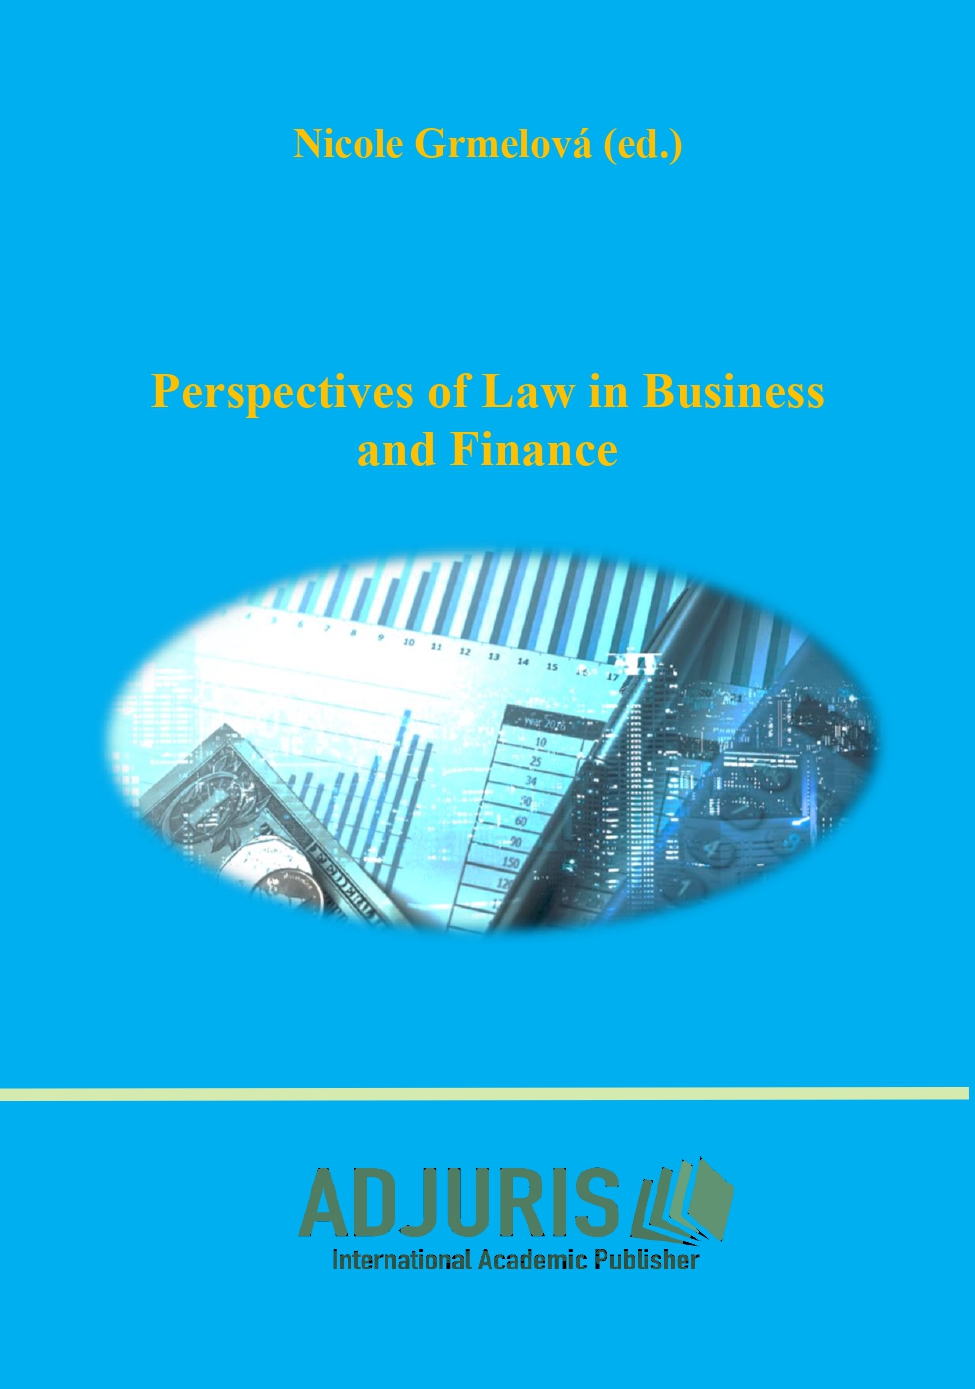 Perspectives of Law in Business and Finance.
Conference proceedings: 14th International Scientific Conference "Law in Business of Selected Member States of the European Union", November 3-4, 2022, Prague, Czech Republic Cover Image